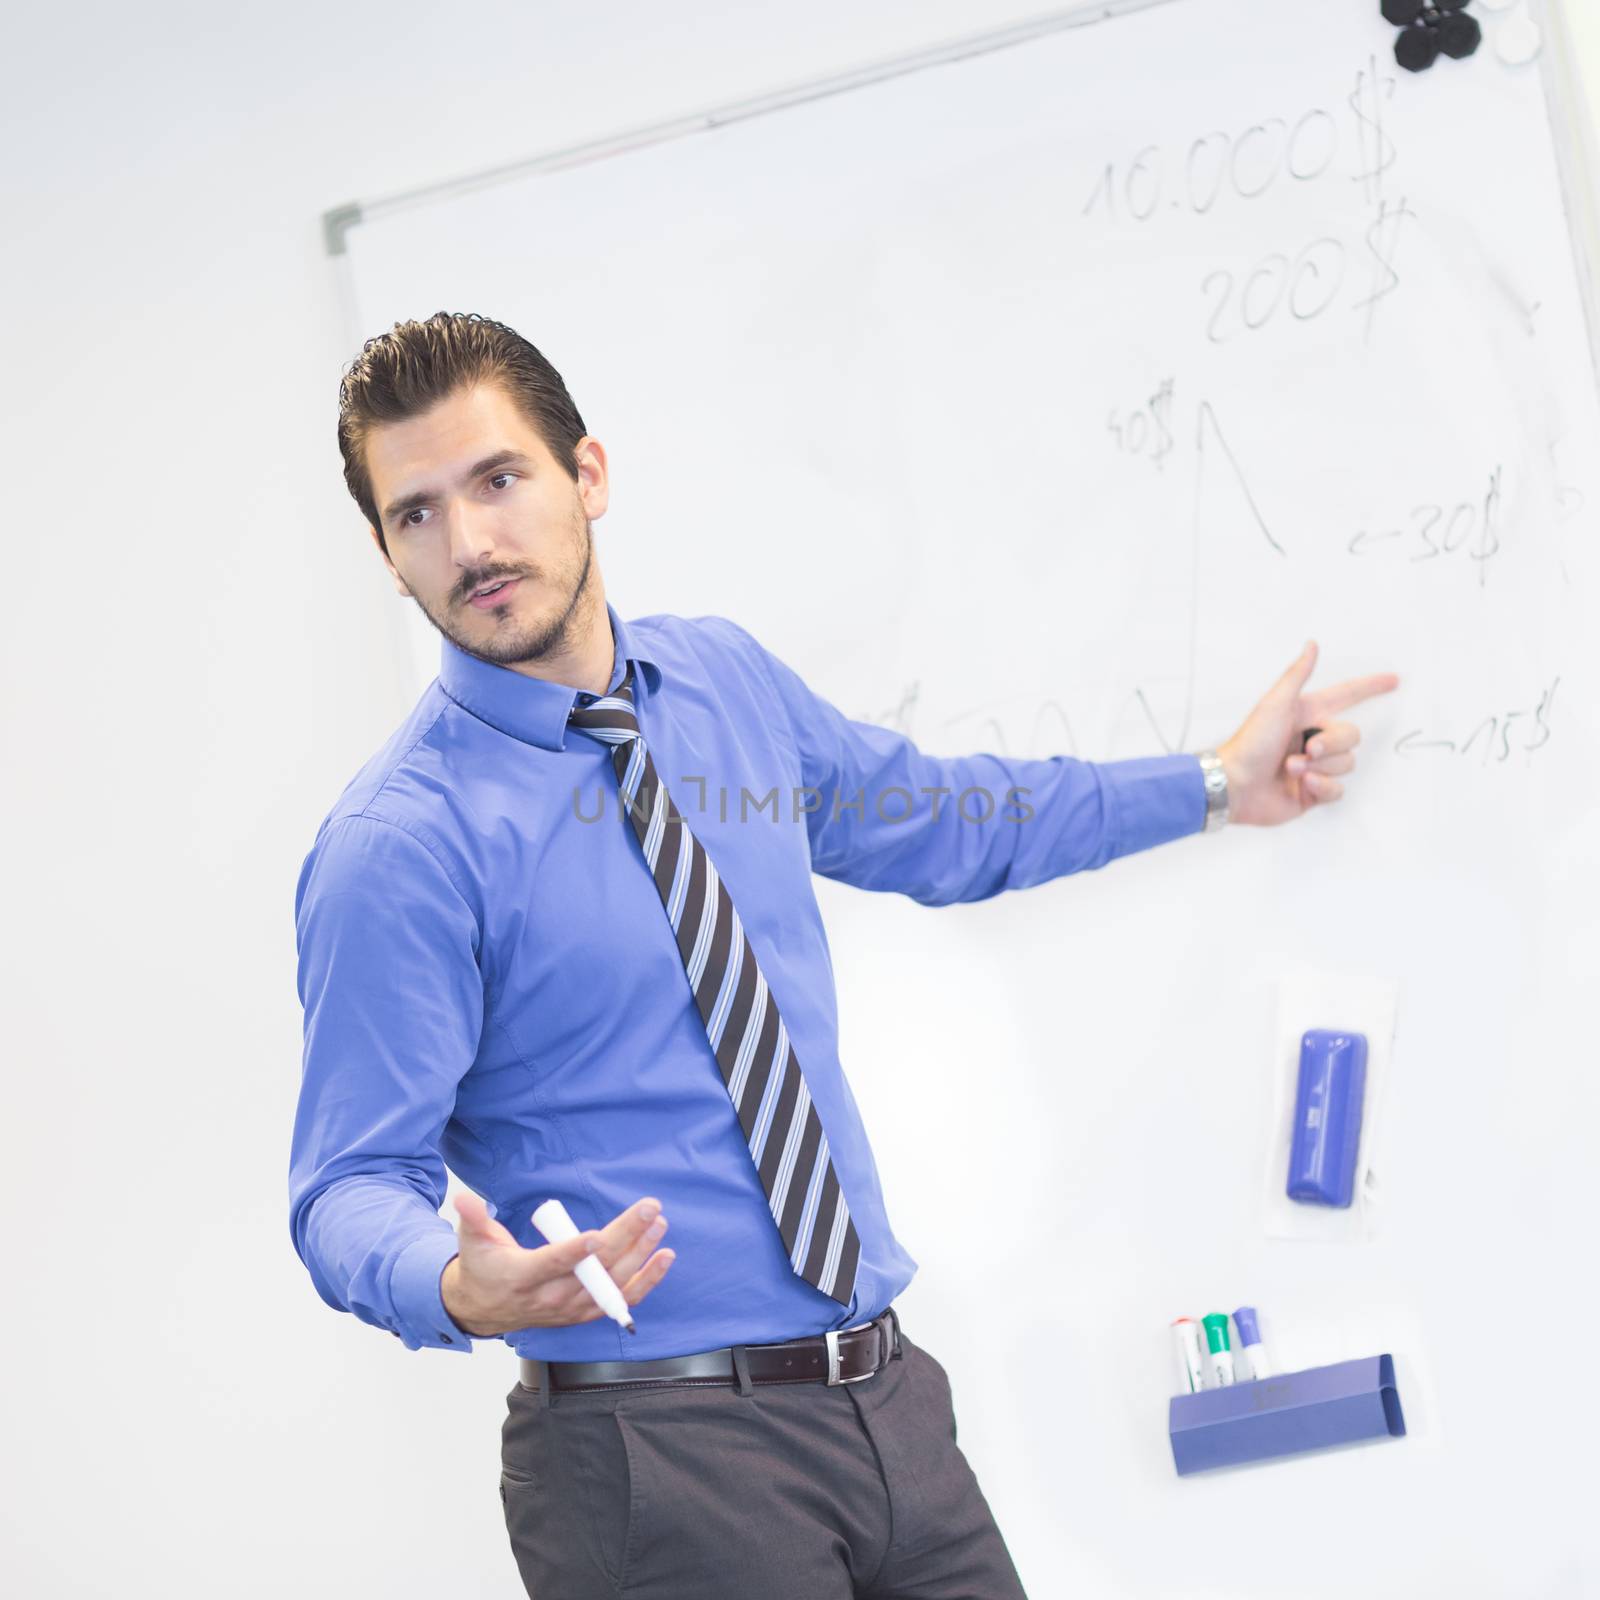 Business man making a presentation in front of whiteboard. Business executive delivering a presentation to his colleagues during meeting or in-house business training, explaining business plans.